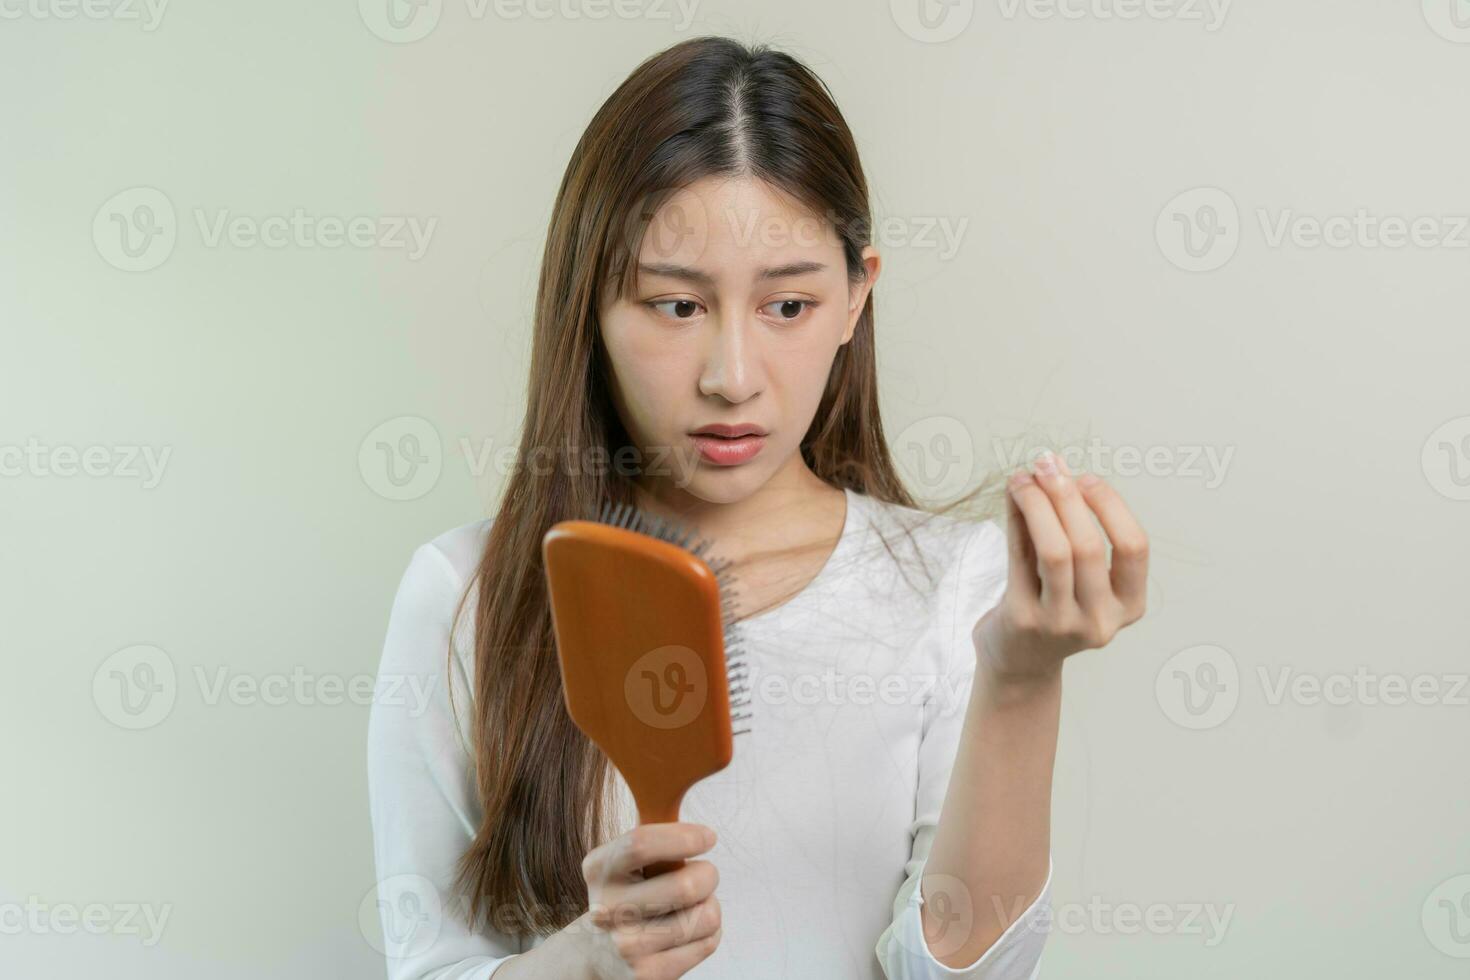 Serious, worried asian young woman, girl holding brush, show her comb, hairbrush with long loss hair problem after brushing, hair fall out on her hand in living room. Health care, beauty treatment. photo